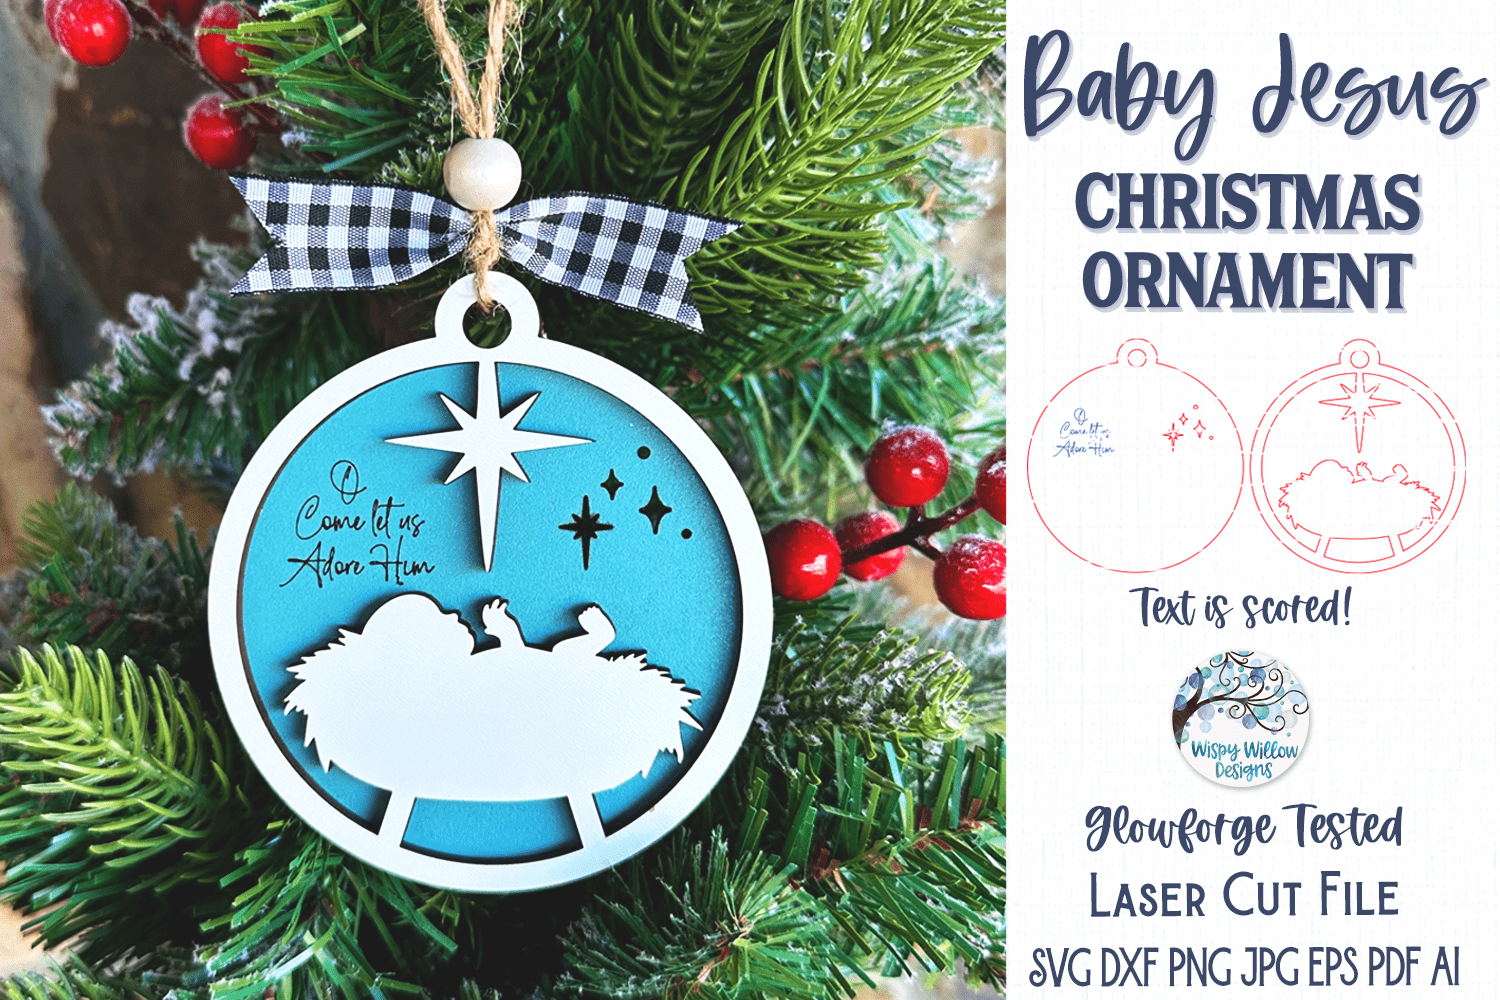 Baby Jesus Christmas Ornament for Glowforge or Laser Cutter Wispy Willow Designs Company